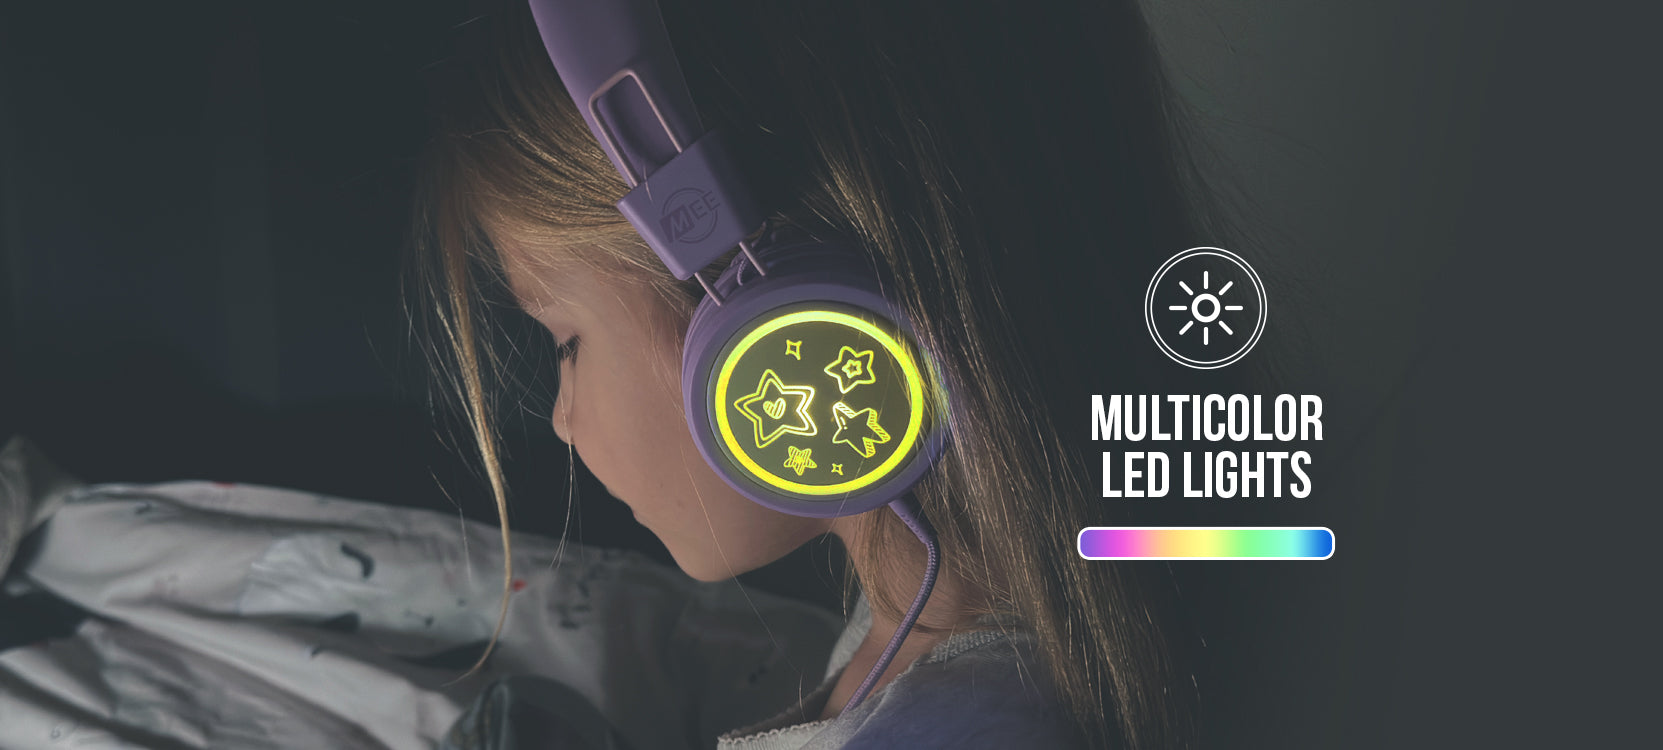 A young child with a light-up headphone featuring multicolor led lights, shown in a dimly lit room, emphasizes the glowing earcup with a recycling symbol design.